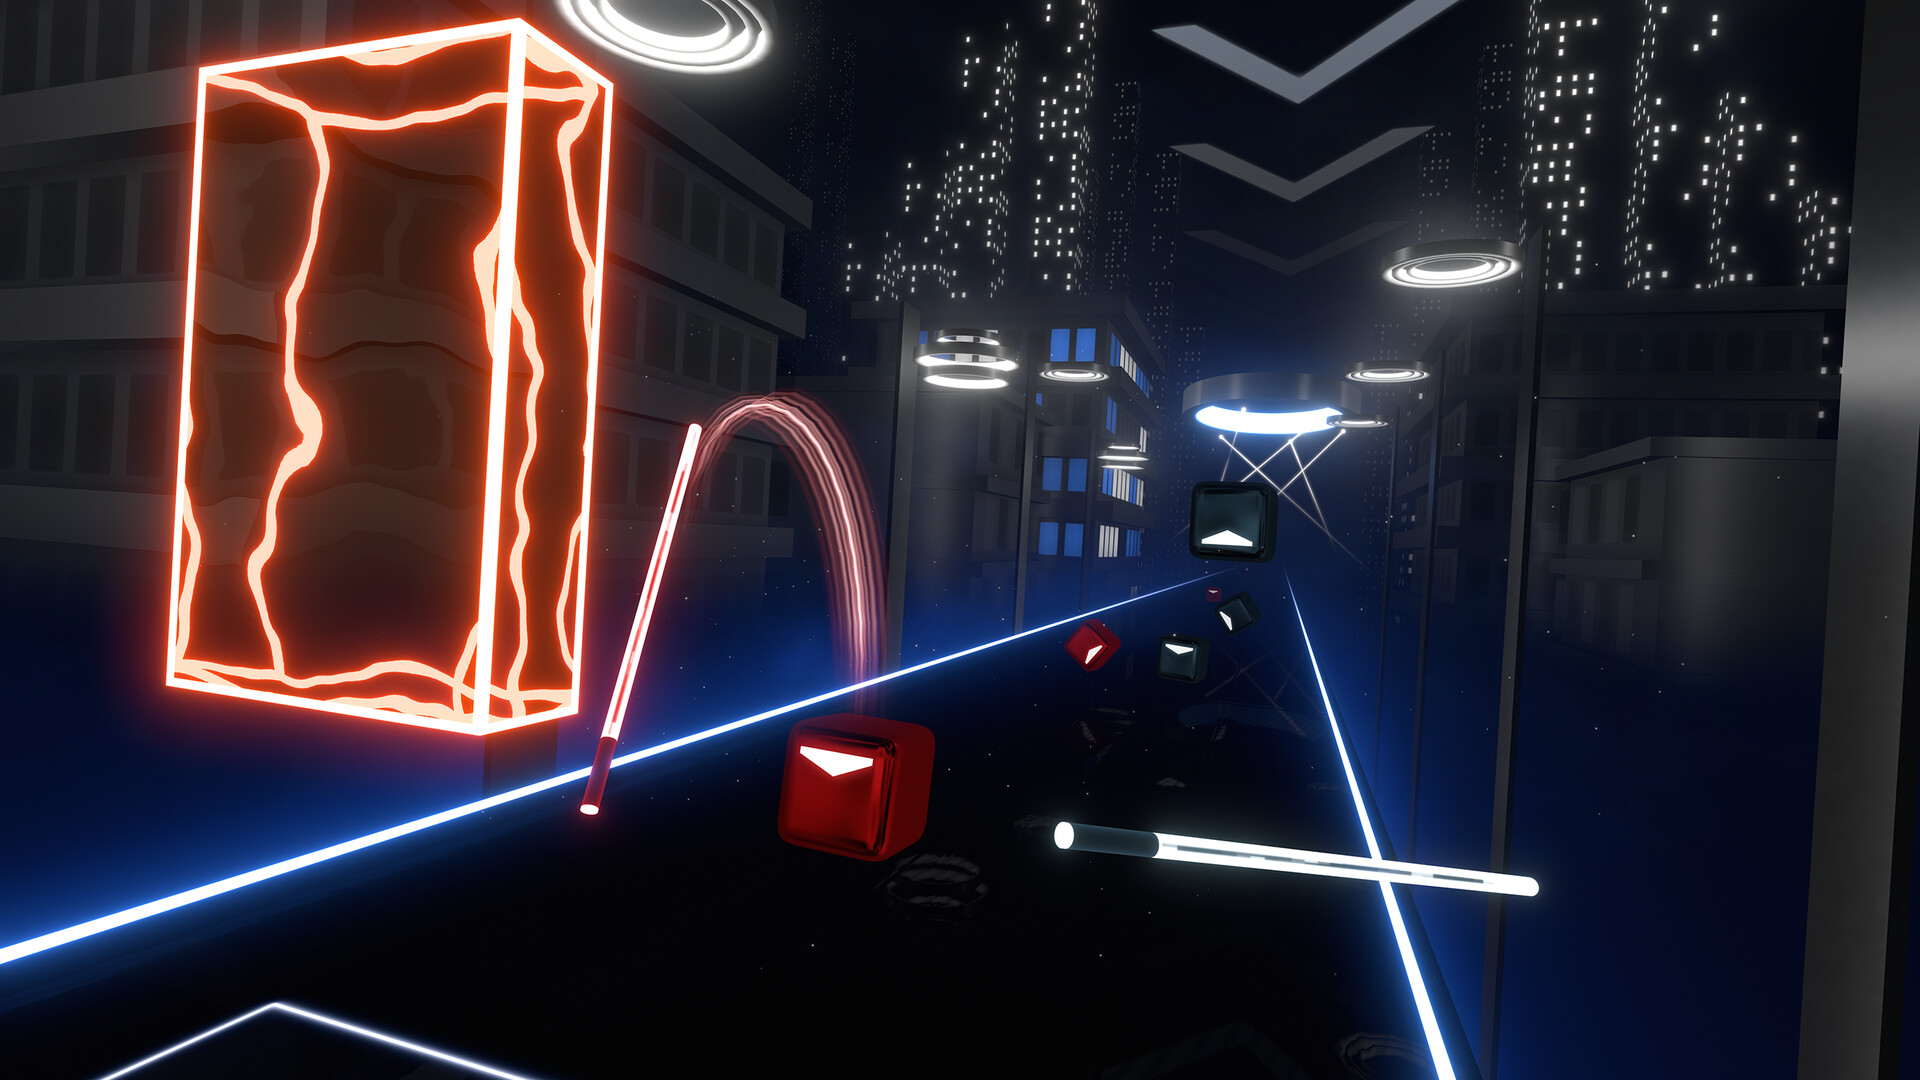 Beat Saber - The Weeknd - "I Feel It Coming (Feat. Daft Punk)" Featured Screenshot #1